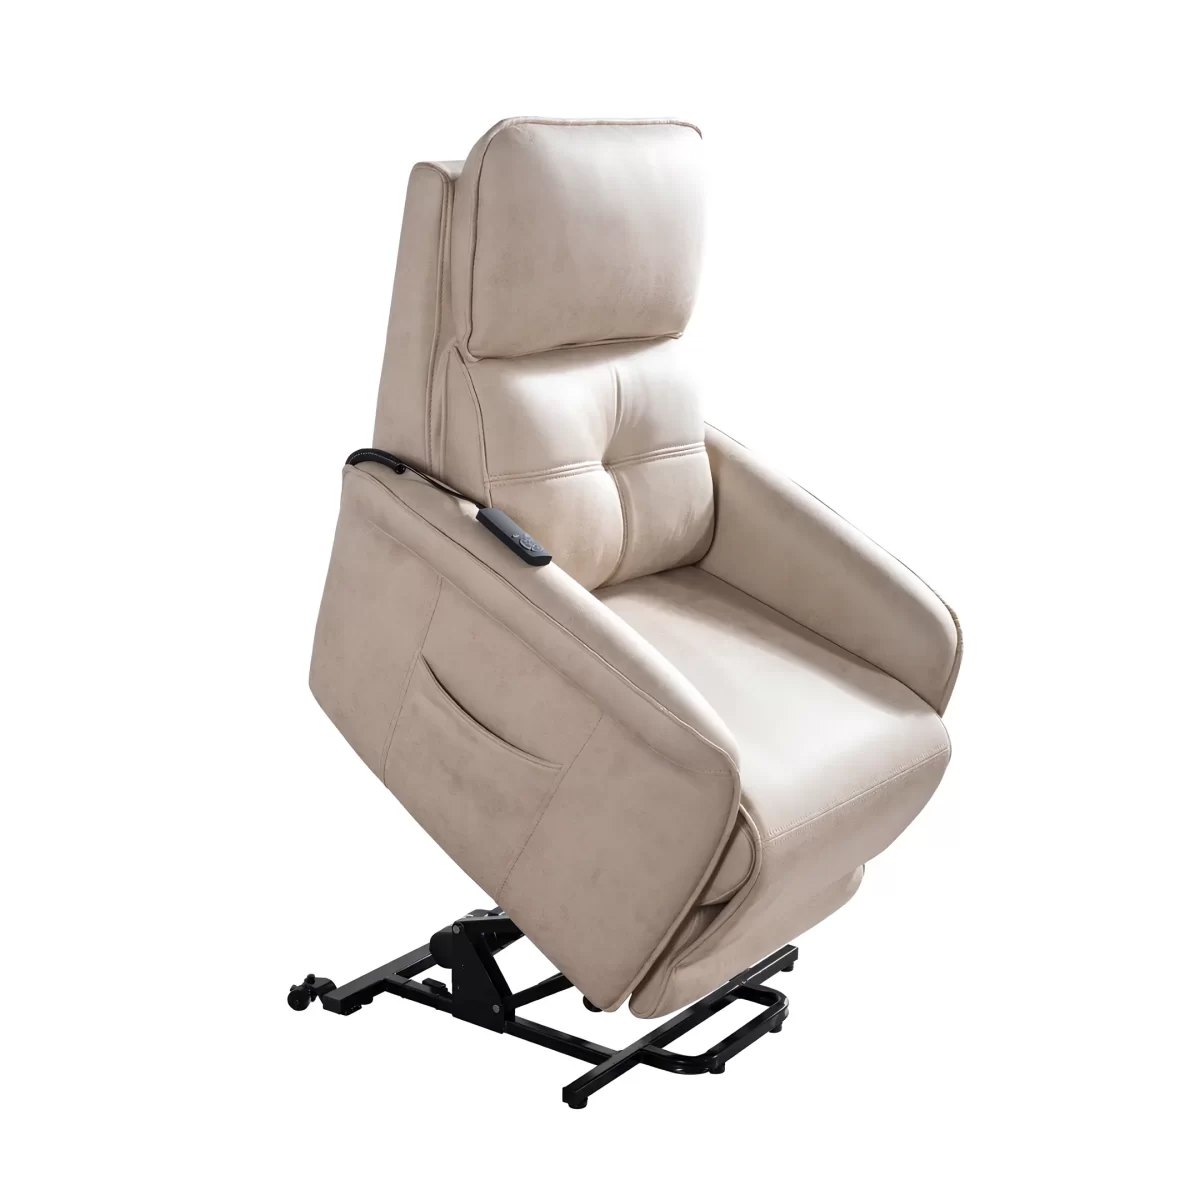 tetra reclining sofa lift for patience chair for hospital